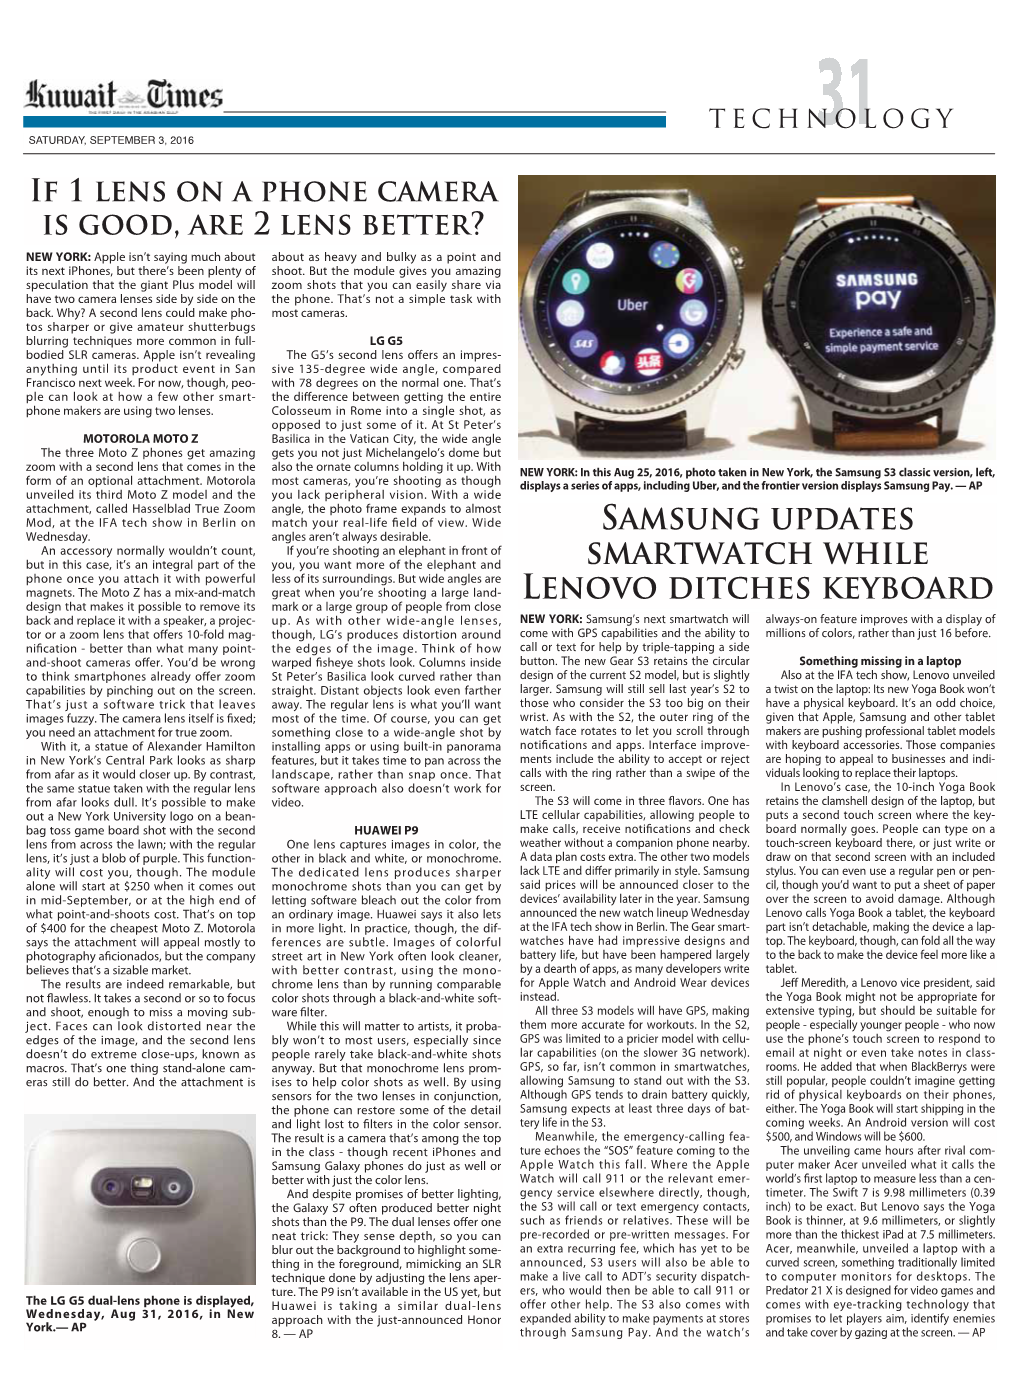 SAMSUNG Updates Smartwatch While Lenovo Ditches Keyboard